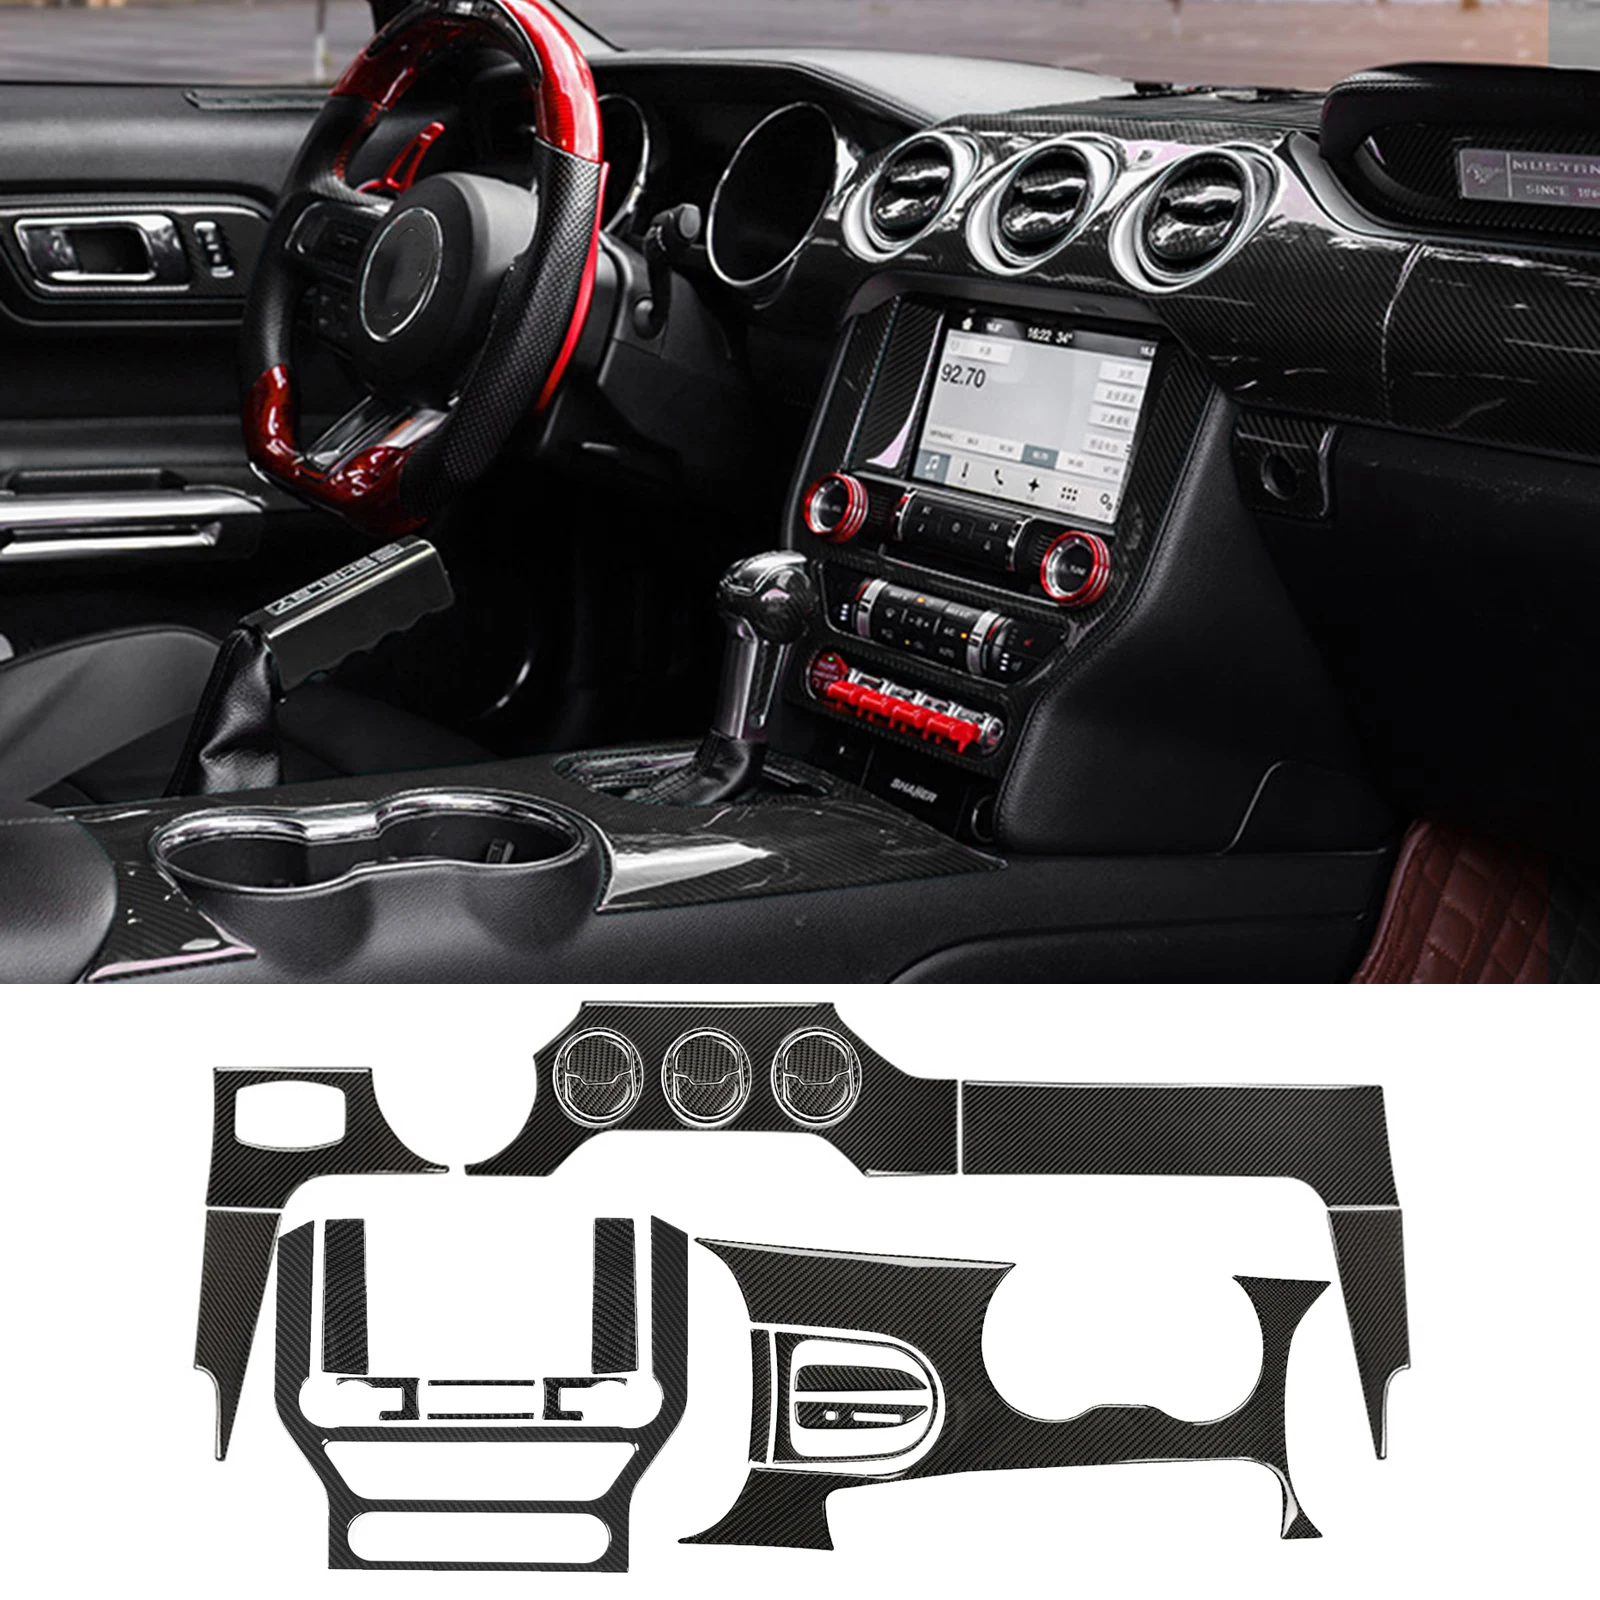 Center Console Decoration Cover Trim Kits for Ford Mustang 2015 2016 2017 2018 2019 2020 2021 Car Accessories Soft Carbon Fiber